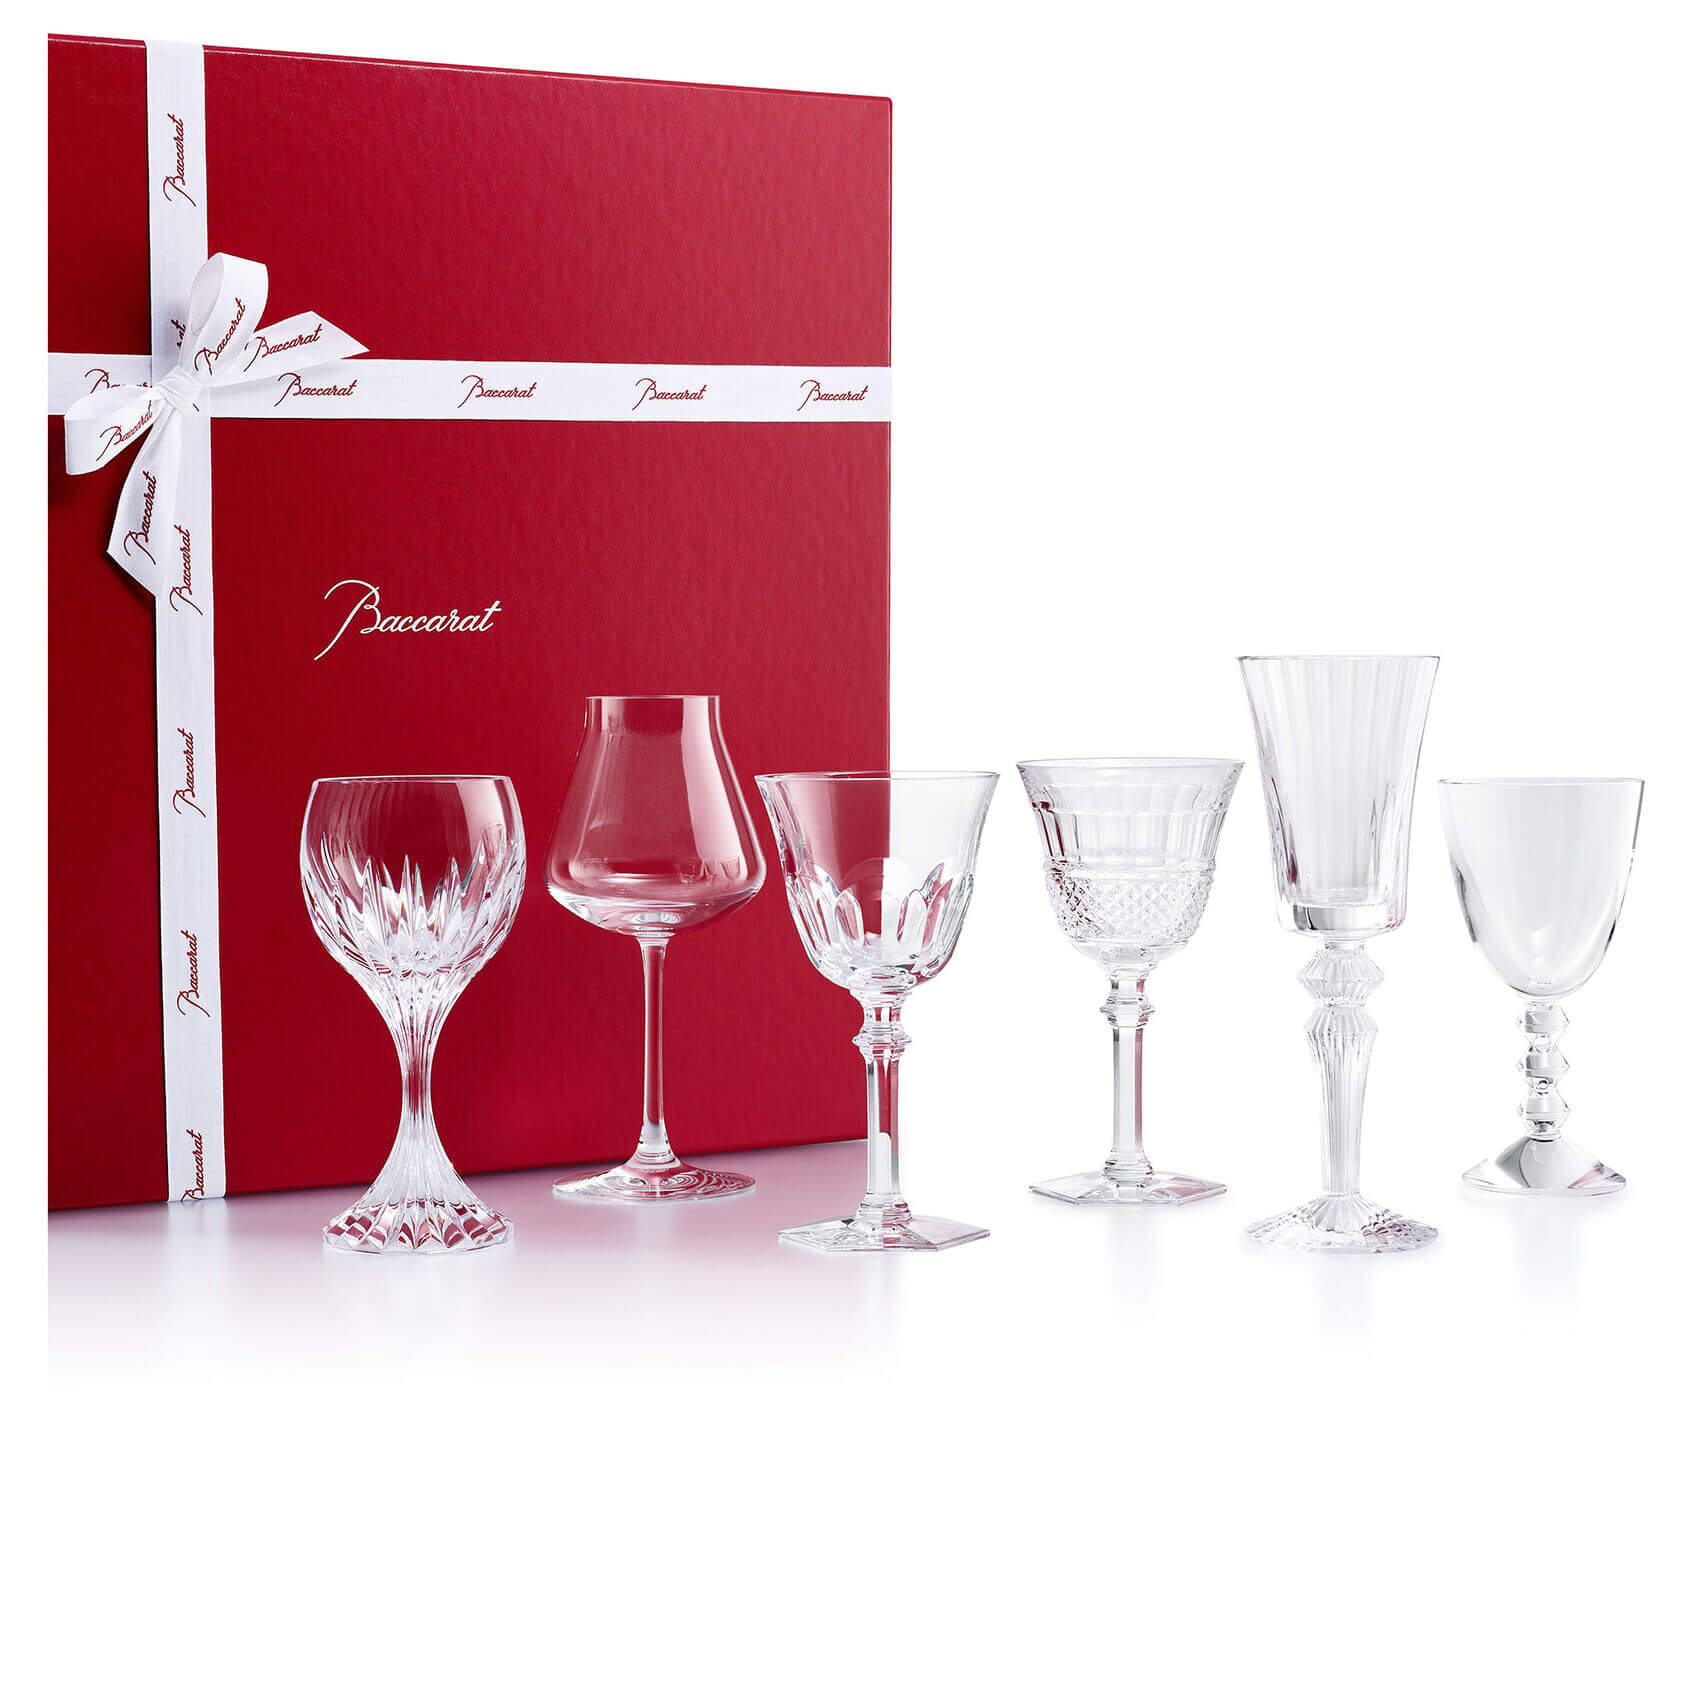 Wine Therapy Glasses Set